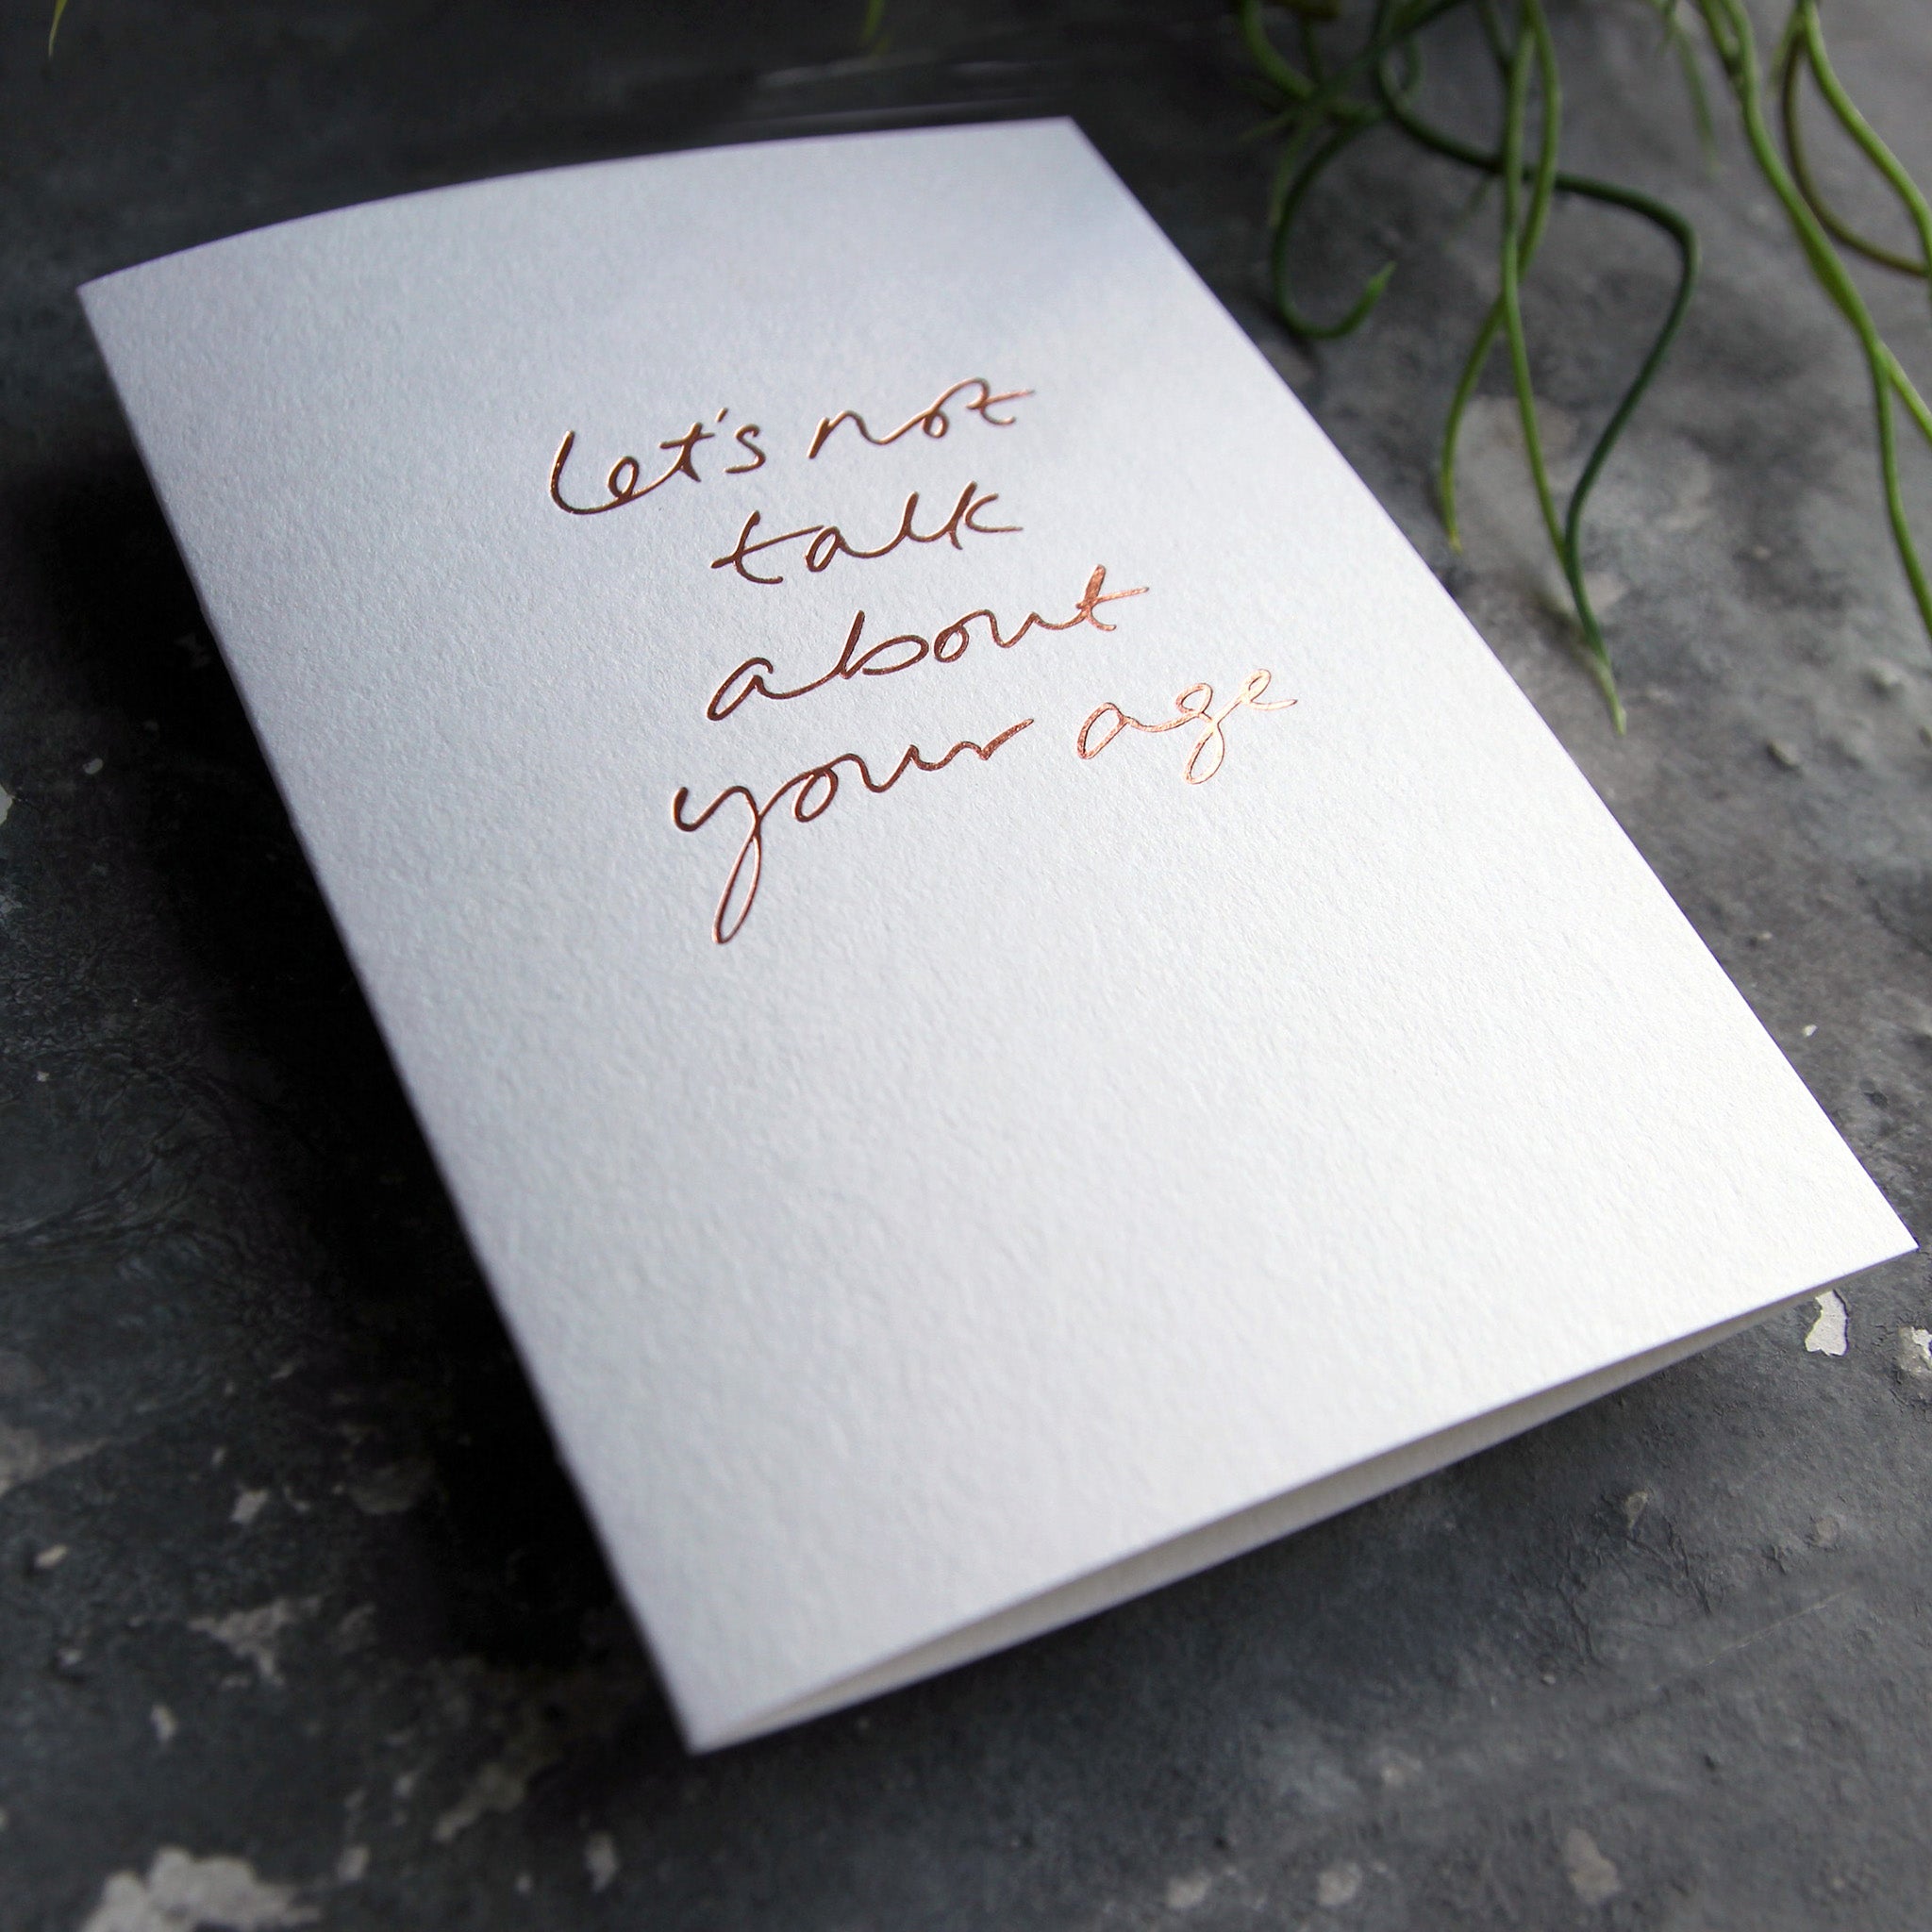 Luxury white greetings card with "Let's Not Talk About Your Age' handwritten in the front and hand printed in rose gold foil on a grey background with some green plant leaves at the side.